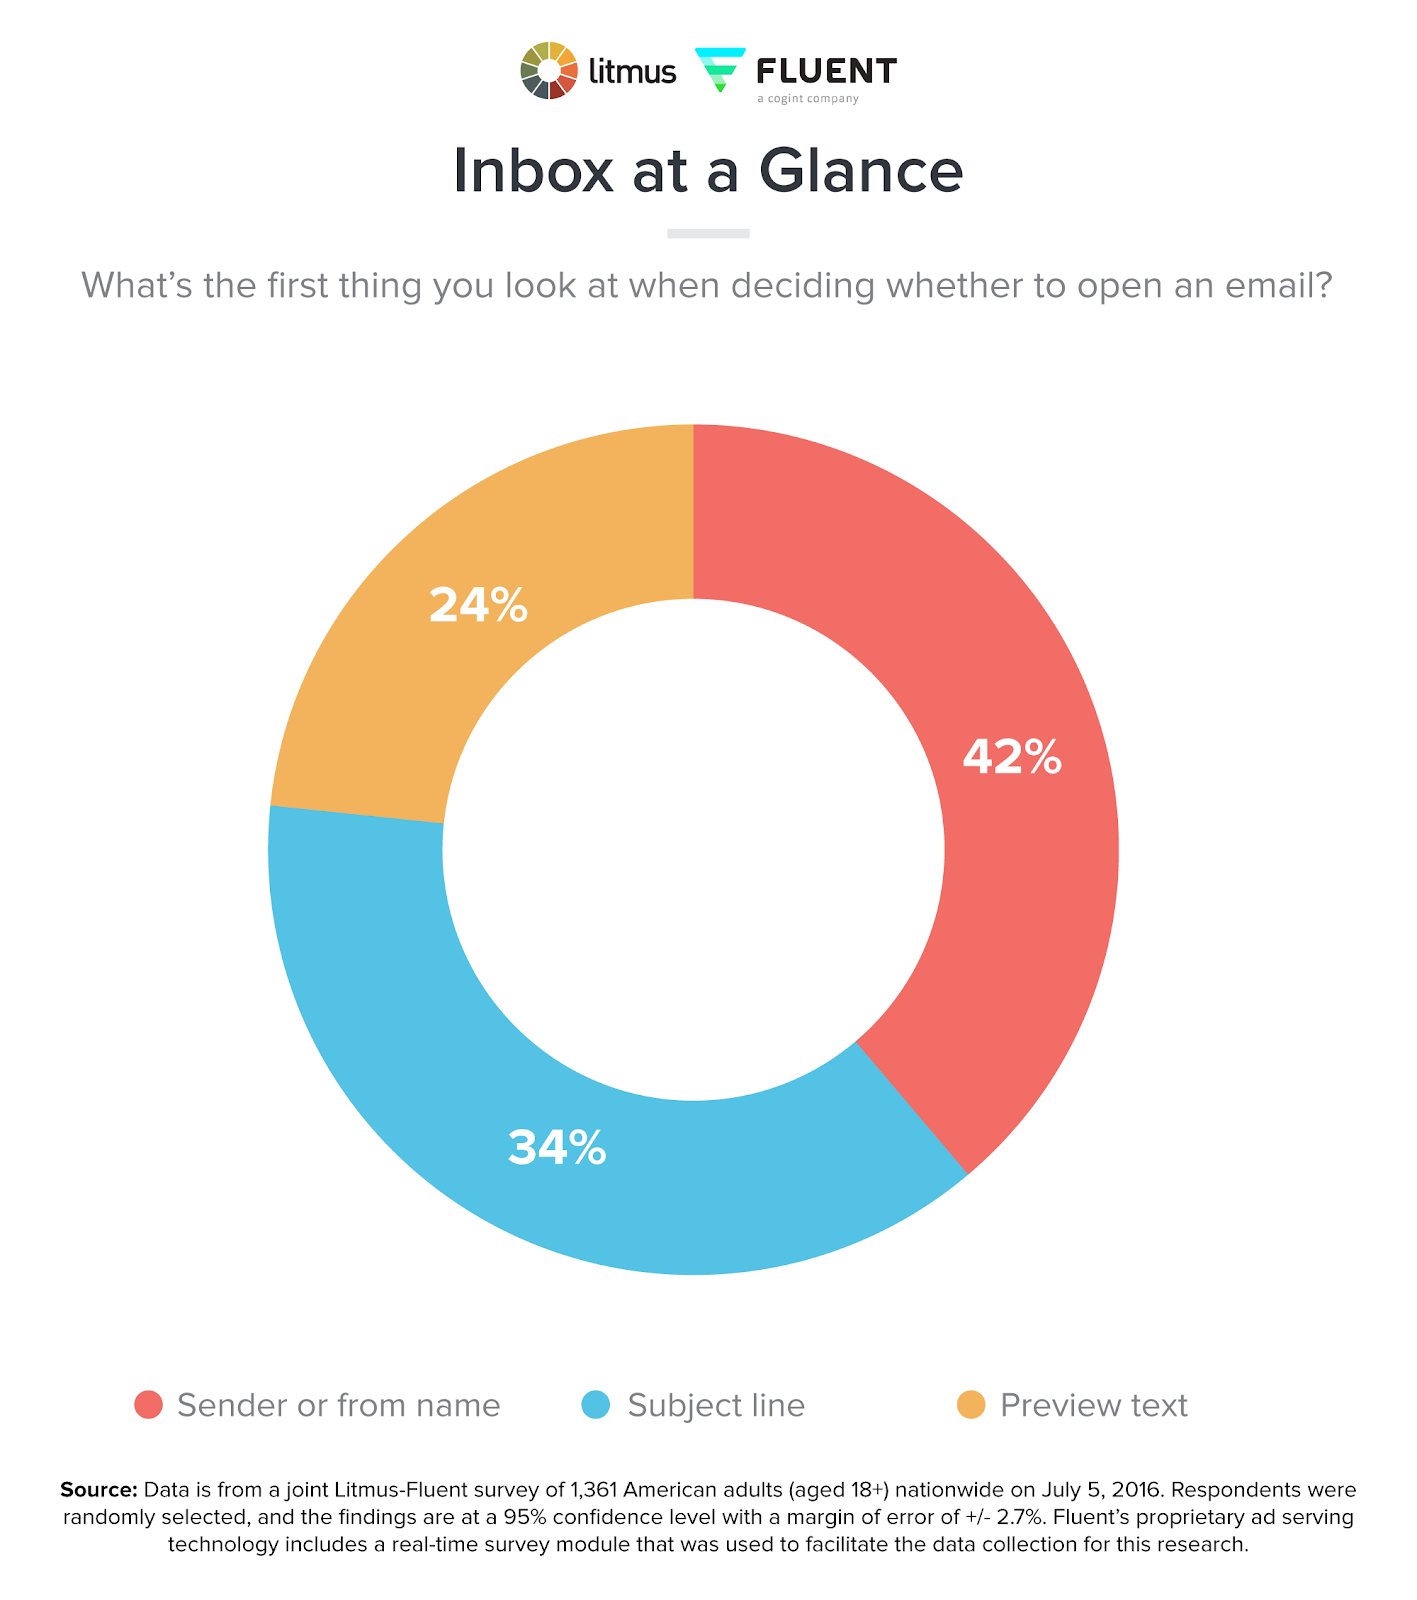 Graph: The first thing people look when checking their email
